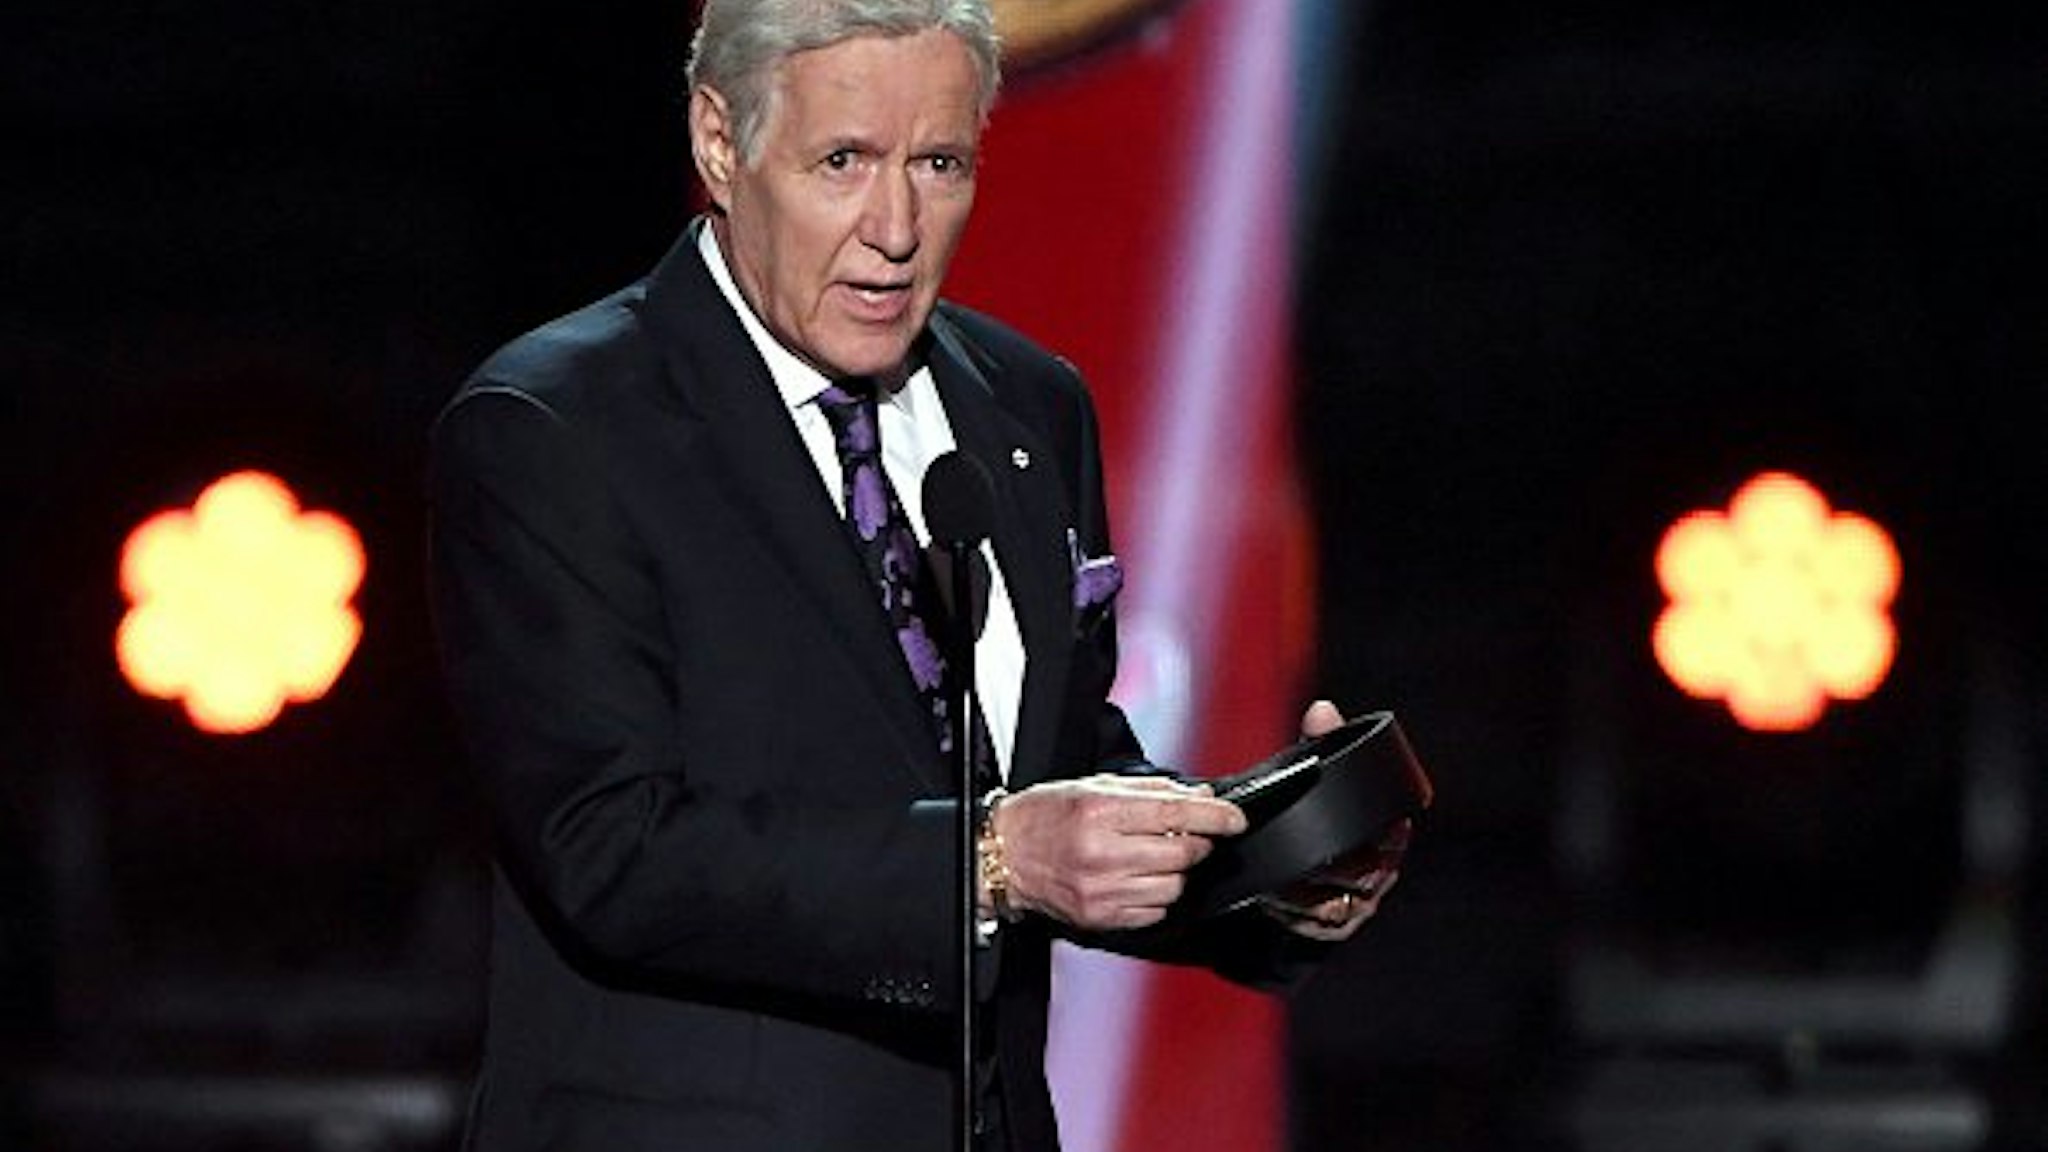 "Jeopardy!" host Alex Trebek presents the Hart Memorial Trophy during the 2019 NHL Awards at the Mandalay Bay Events Center on June 19, 2019 in Las Vegas, Nevada.